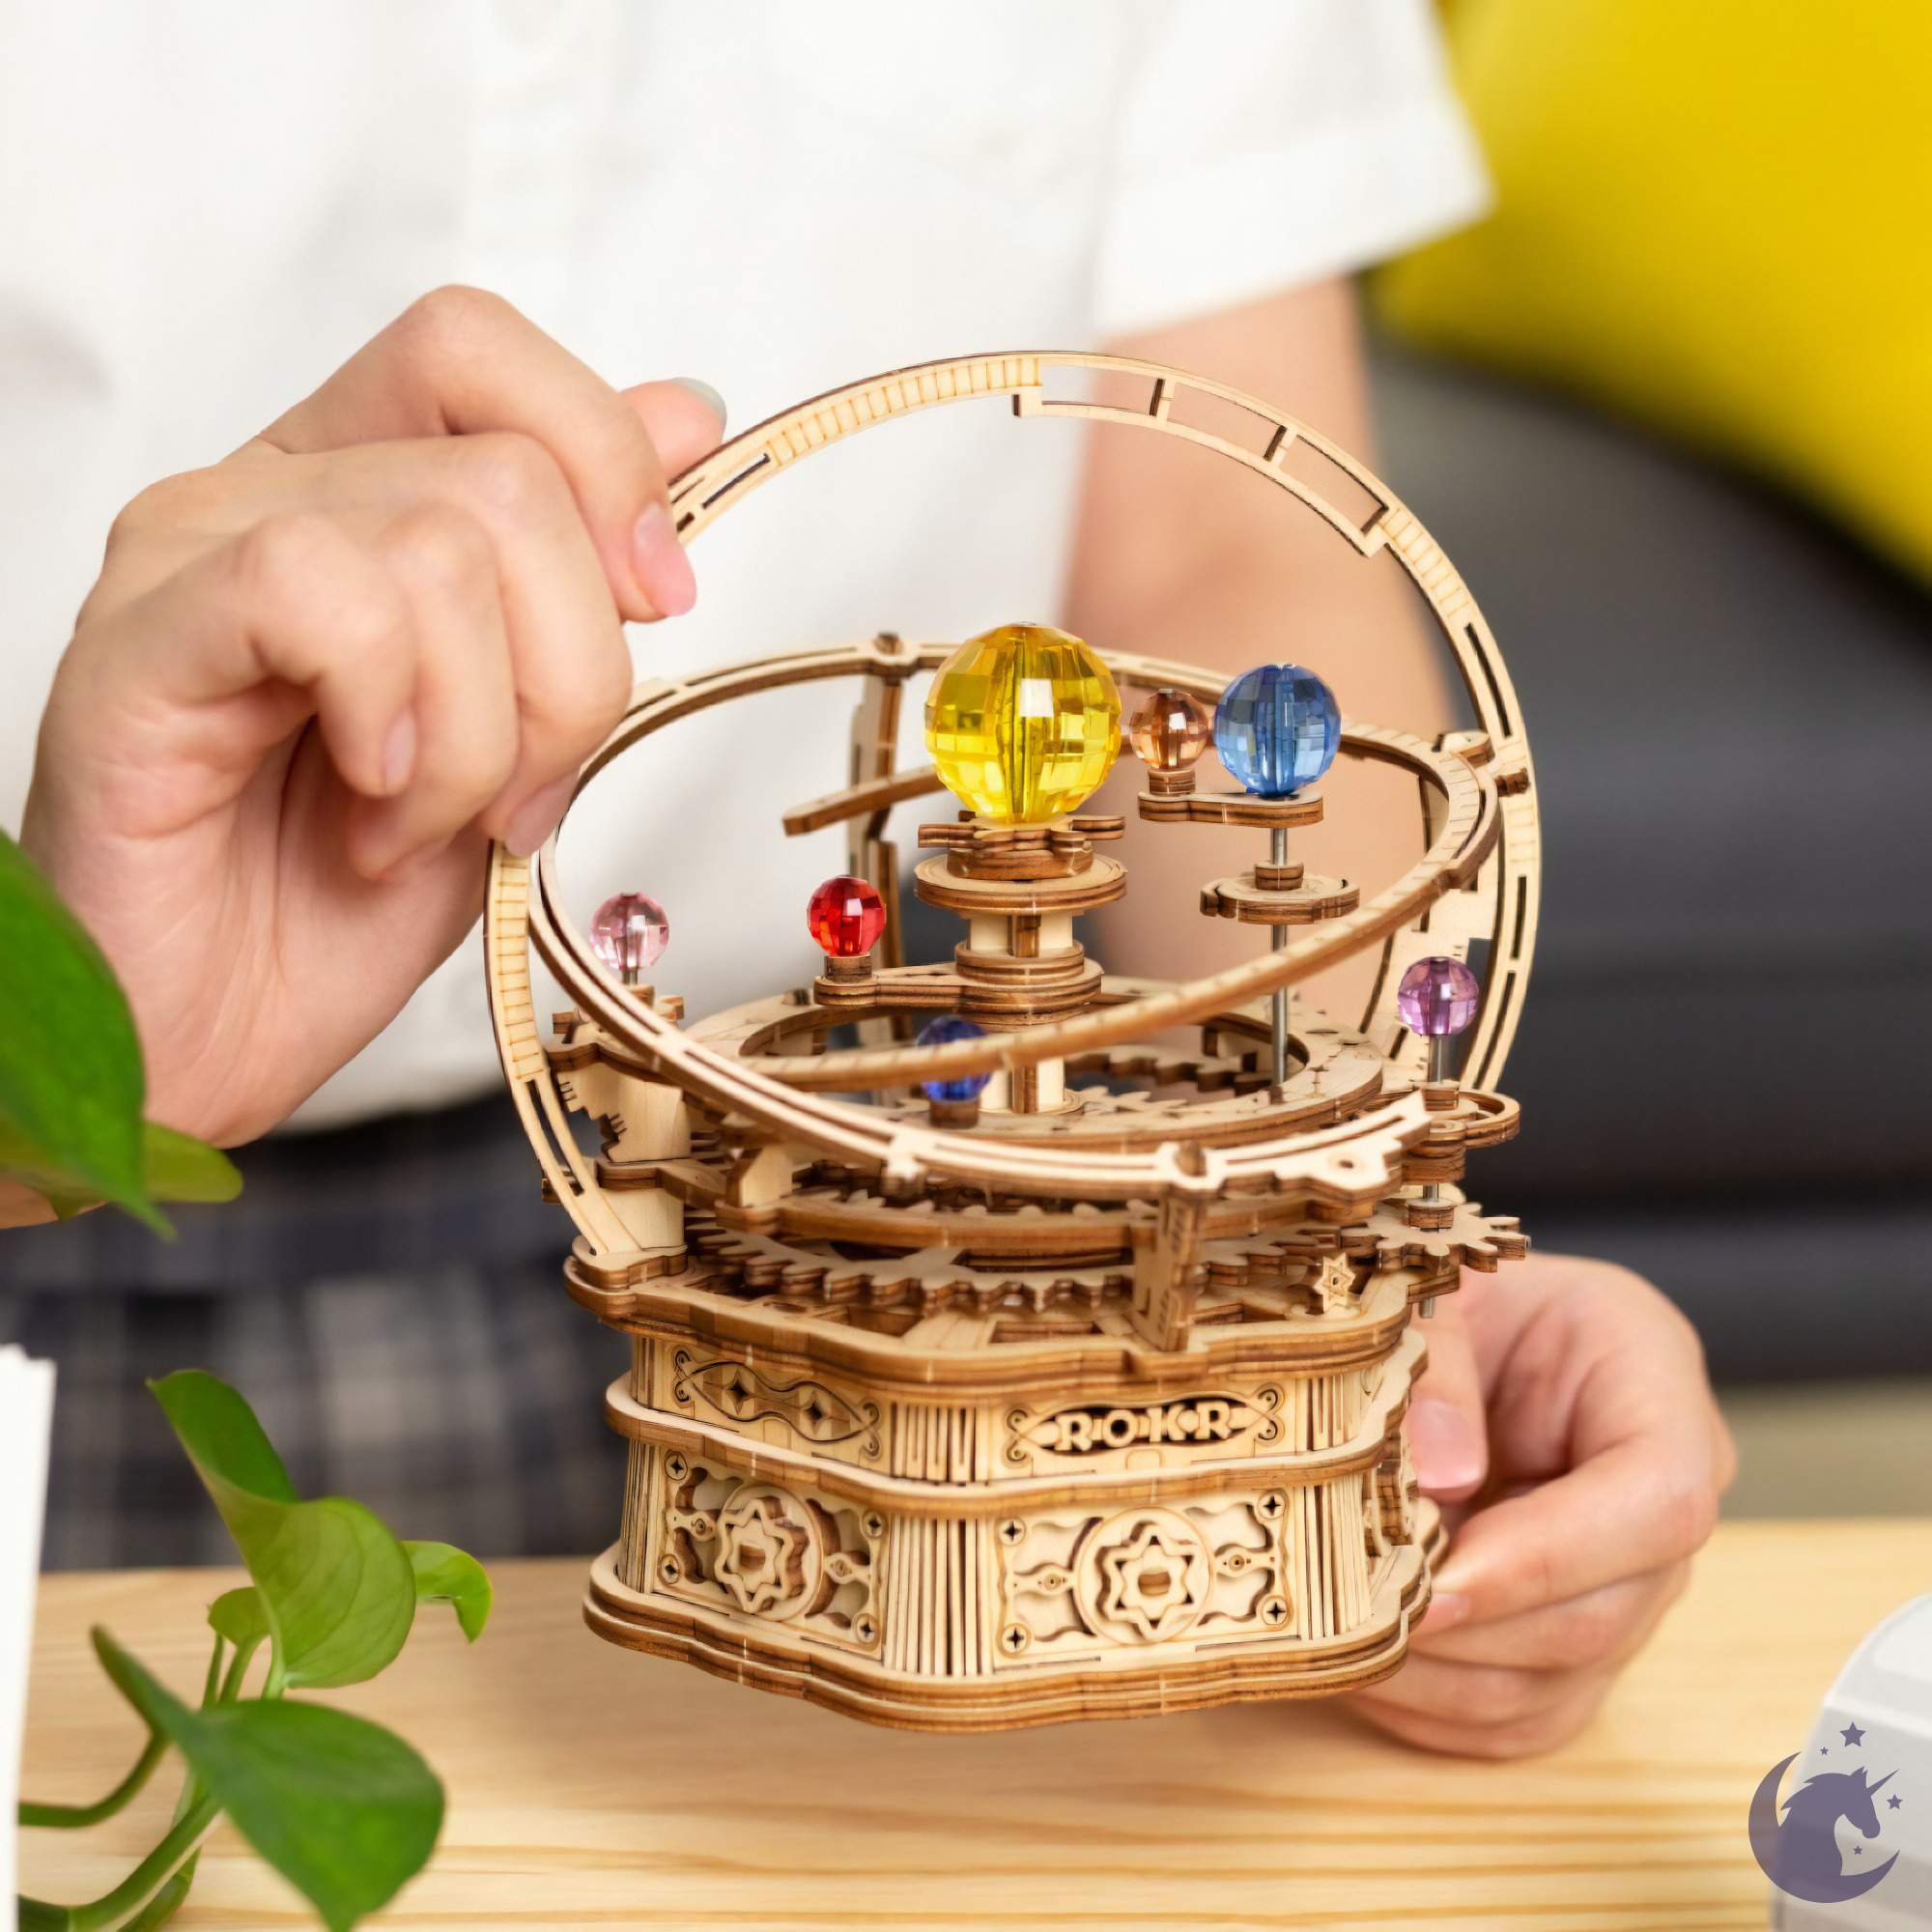 unicorntoys robotime rokr starry night diy mechanical music box 3d wooden puzzle kit birthday gifts for teen AMK51